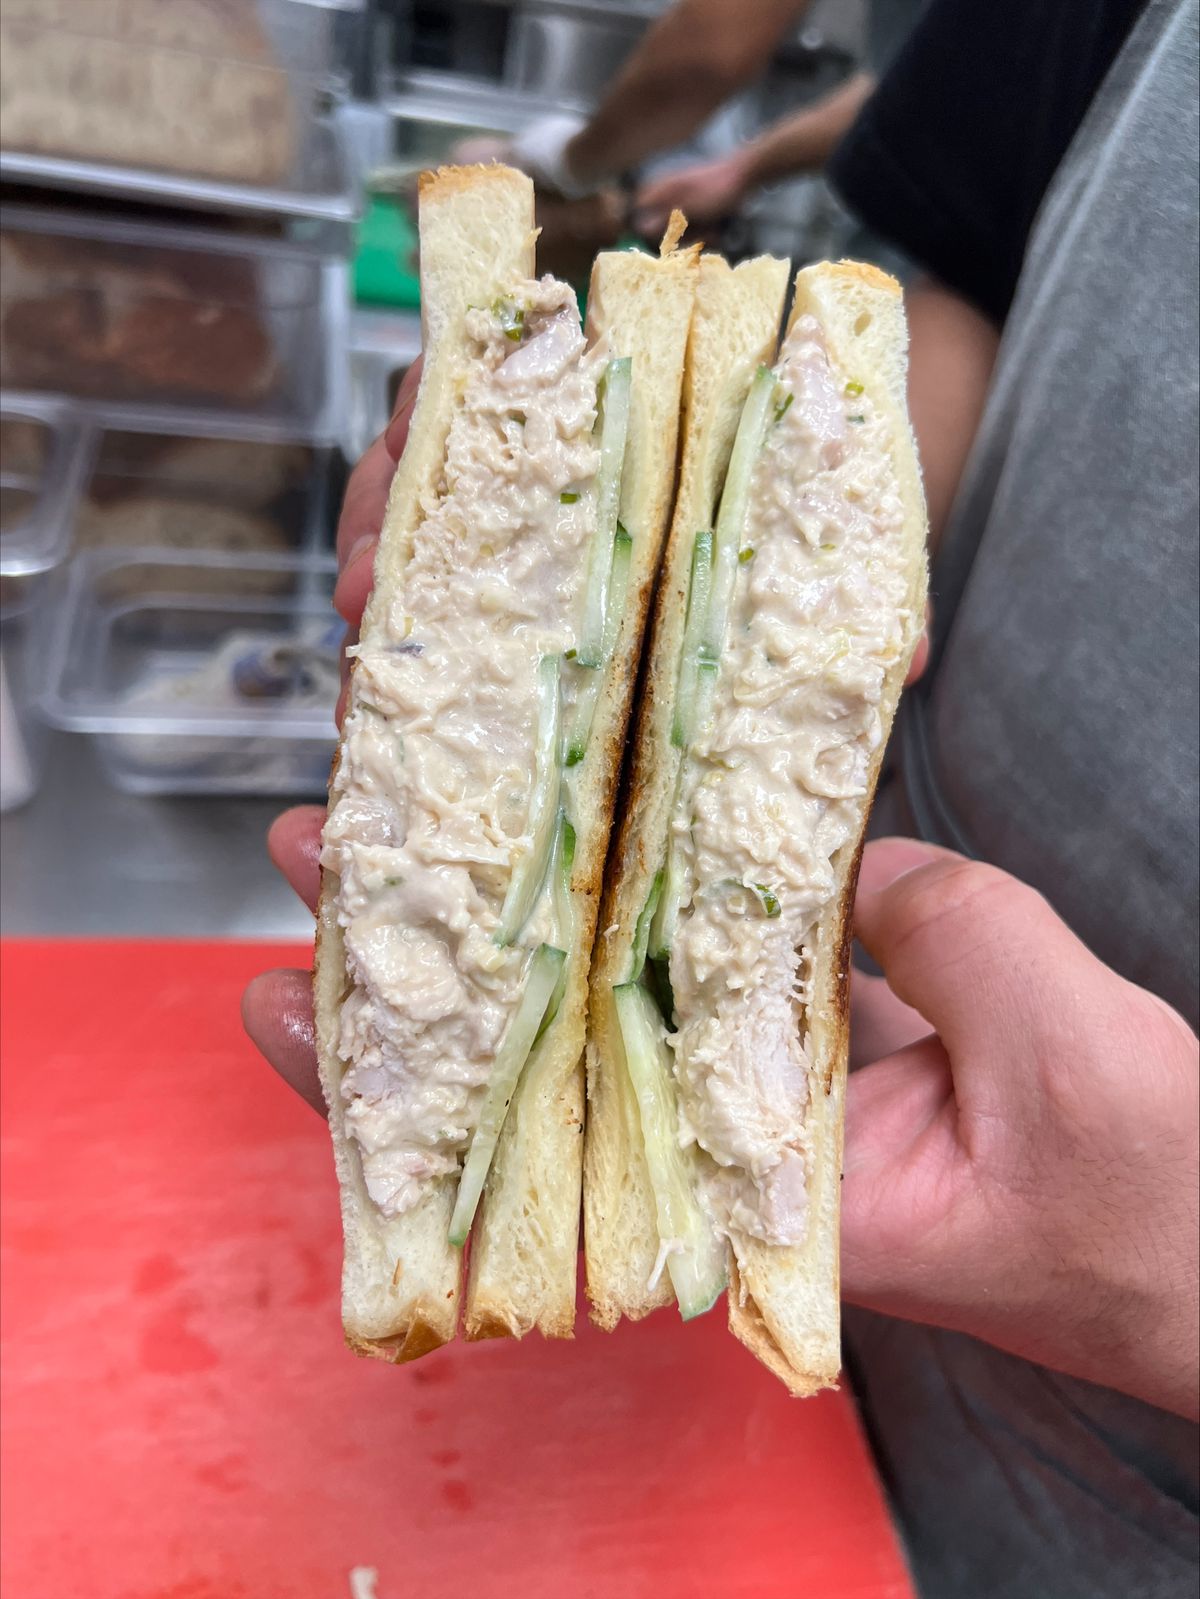 Hands holding a white bread sandwich with chicken salad and cucumbers.